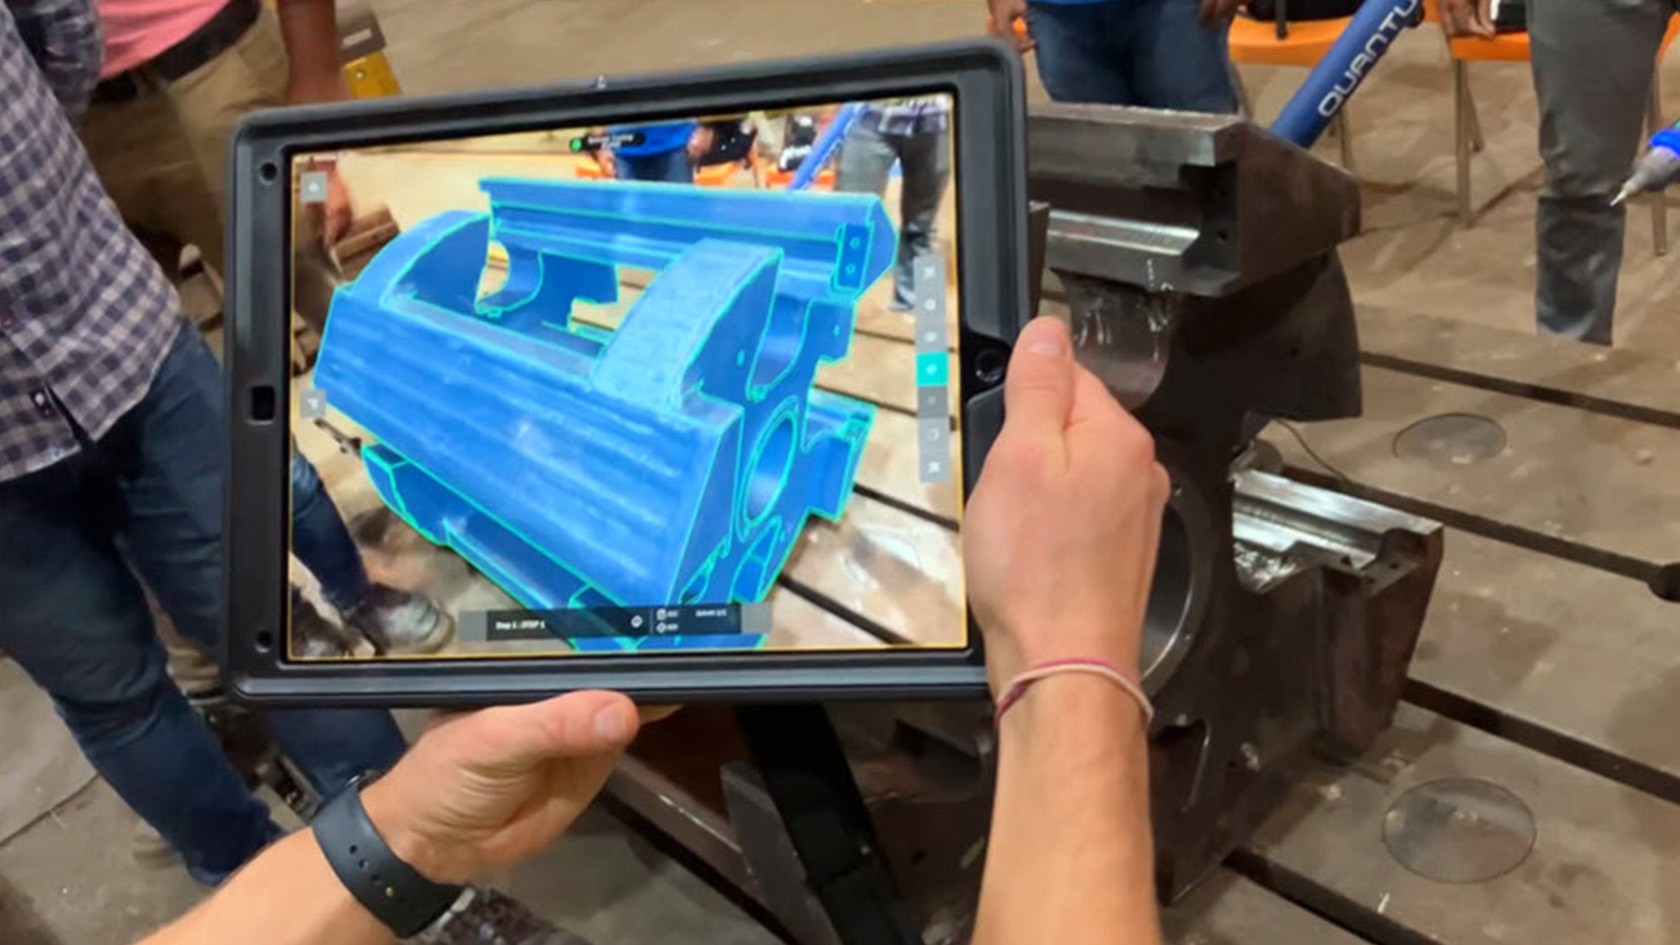 Tablet with AR software